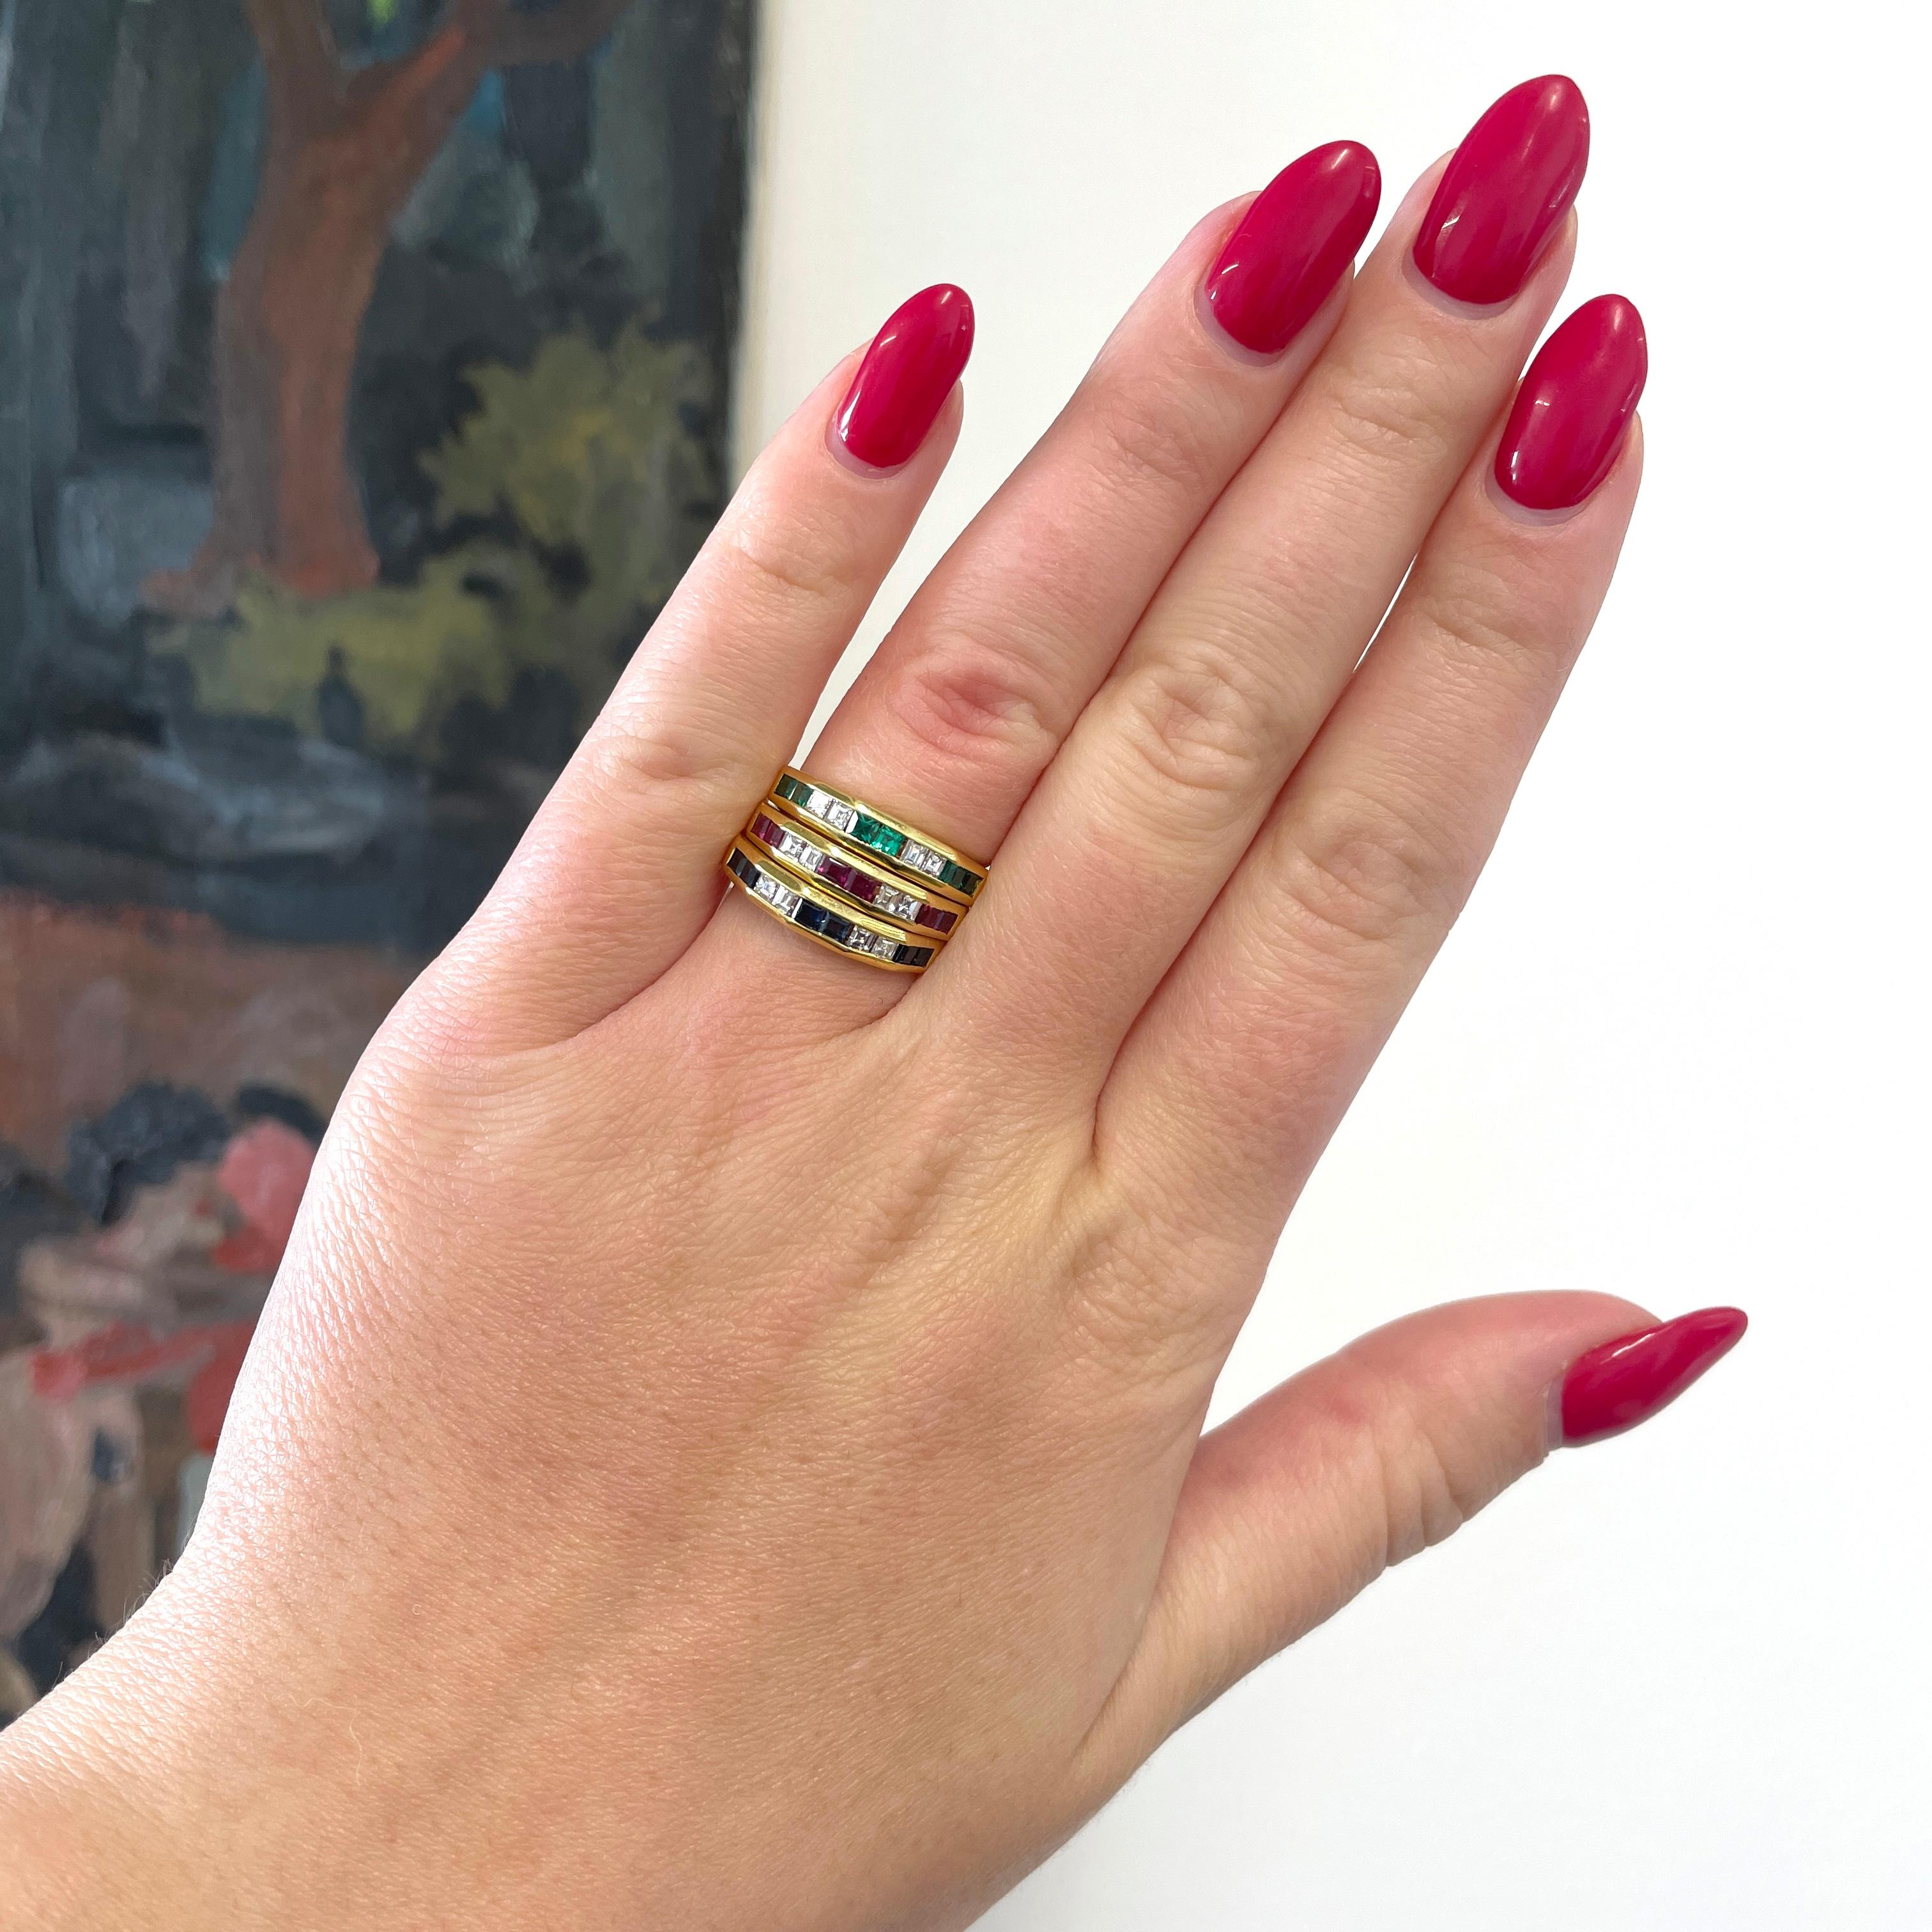 Are you charismatic, fun and love color? This Vintage Italian Diamond Sapphire Emerald Ruby 18k Gold Stacking Eternity Bands are for you! Super fun and colorful. Wear them at ones or stack individually with your other favorite jewelry. You can even